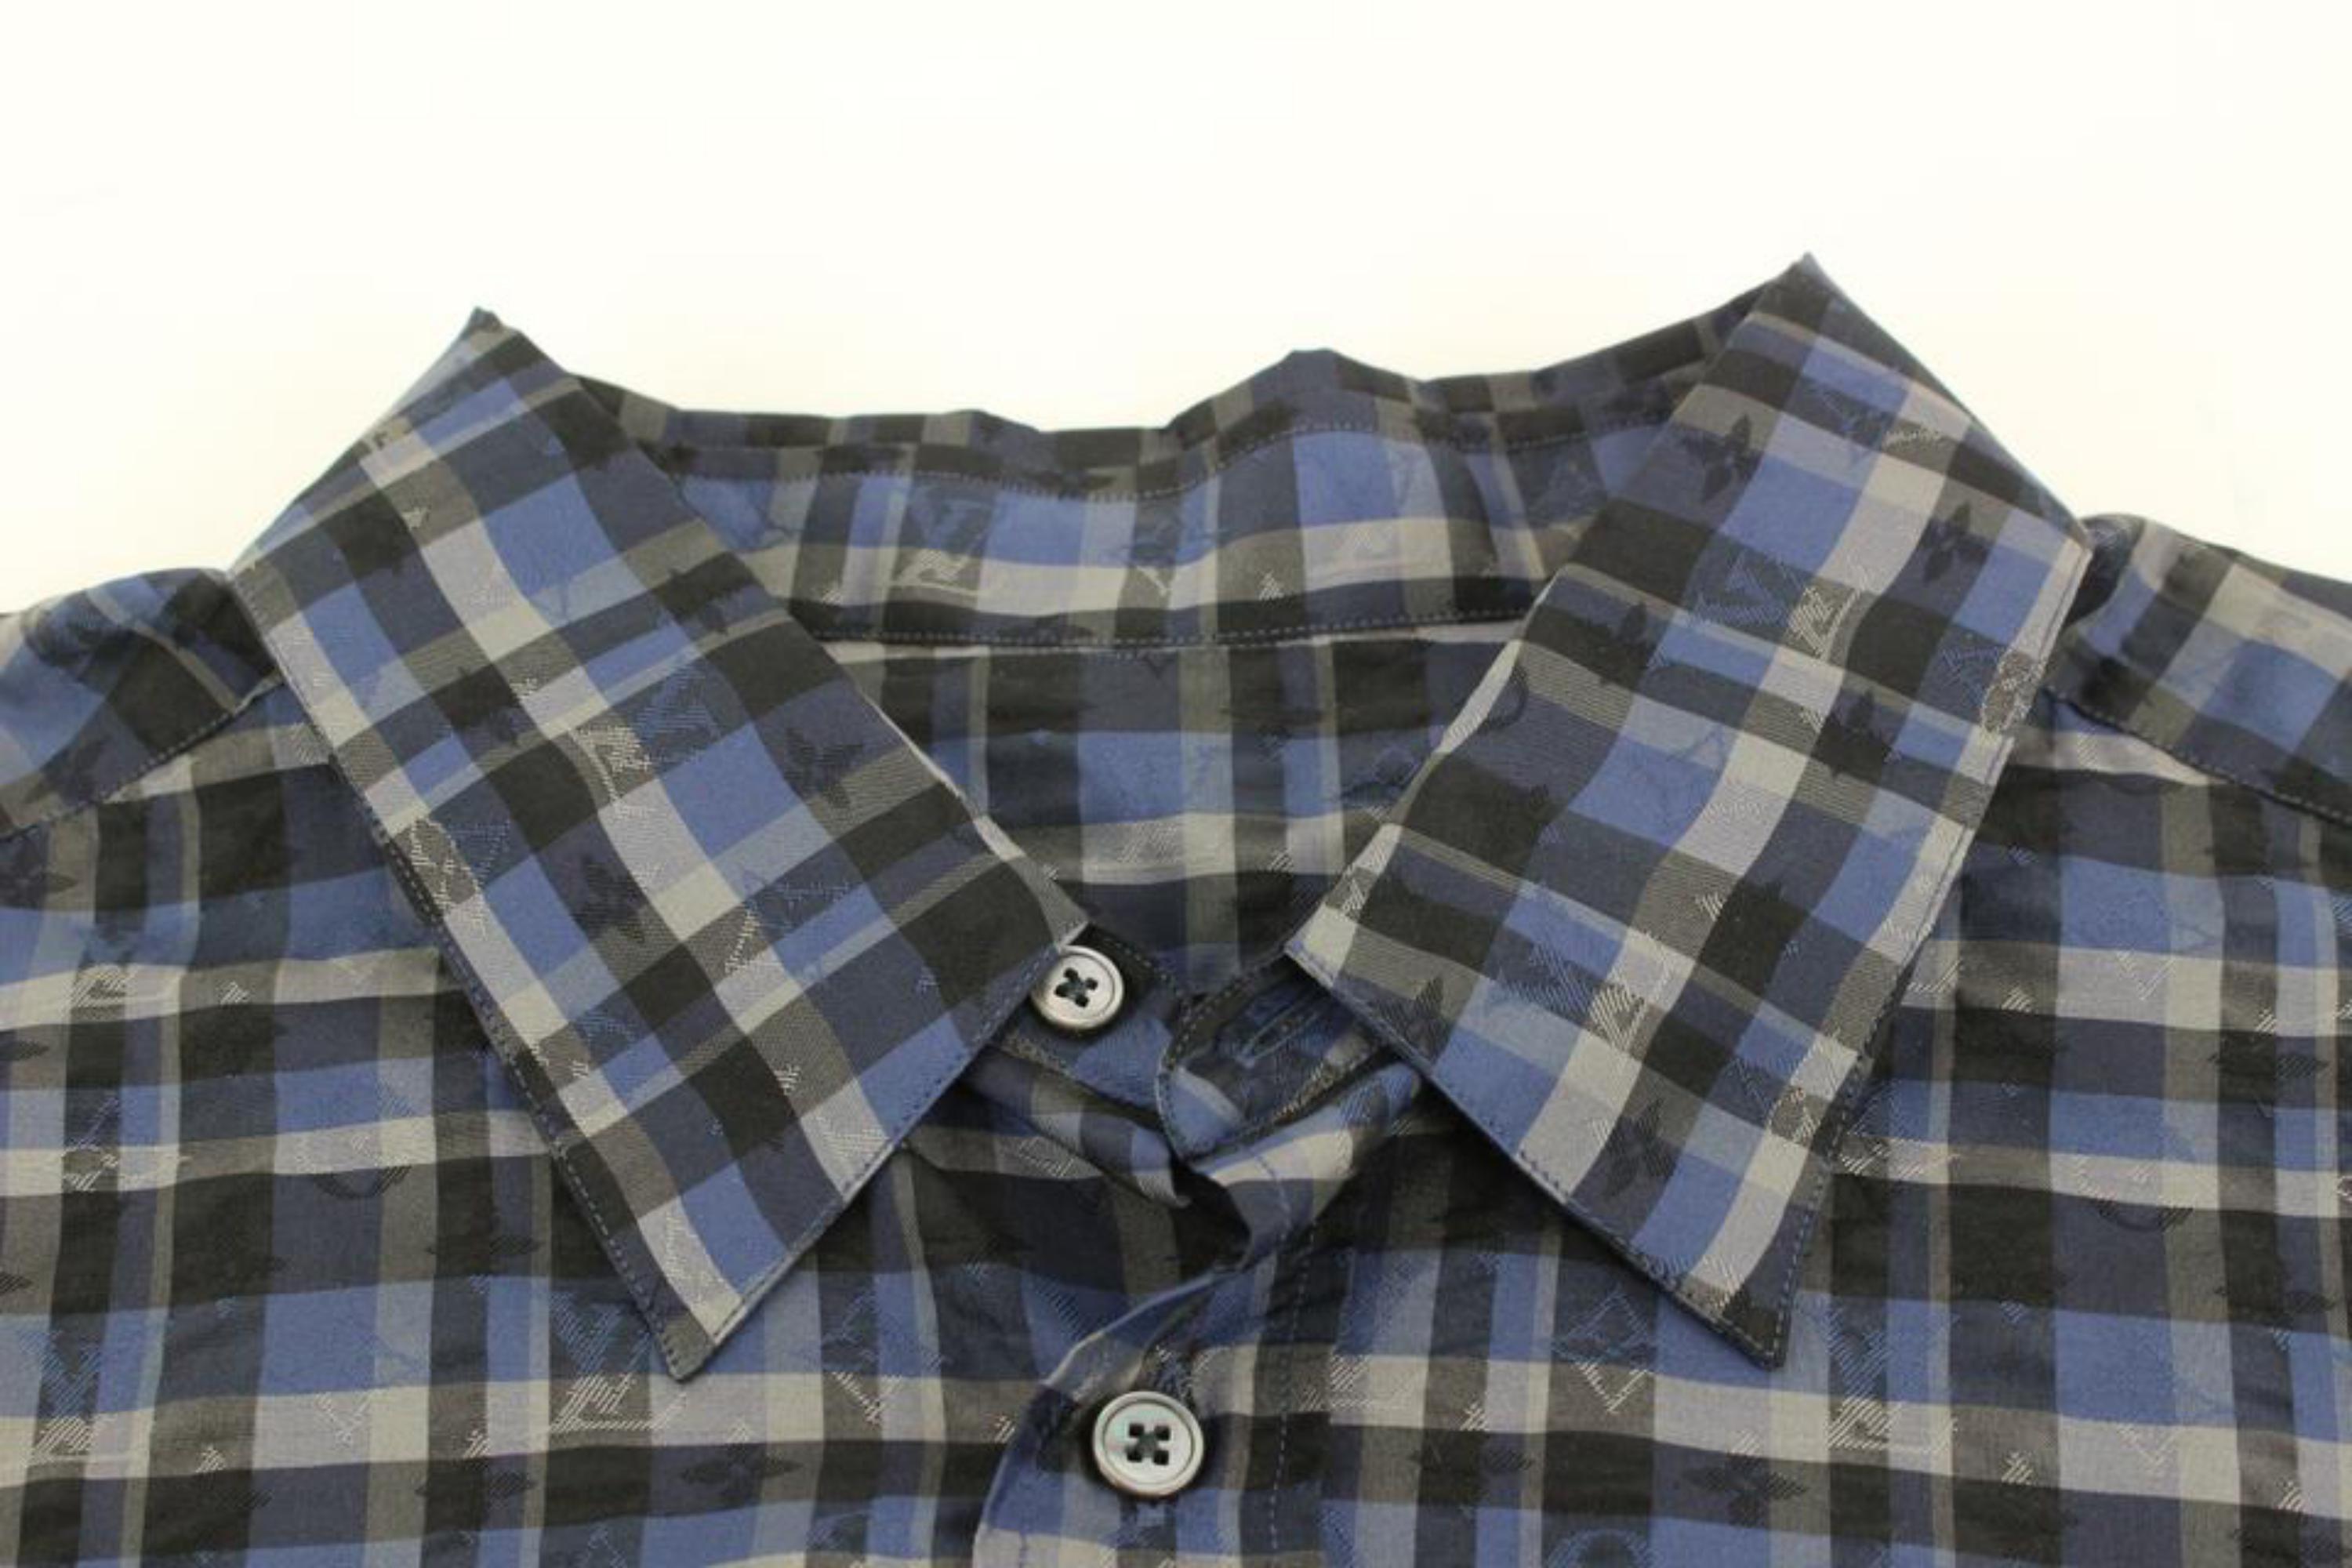 Louis Vuitton Men's XL Plaid LV Monogram Long Sleeve Button Down Shirt 27lk712s In New Condition For Sale In Dix hills, NY